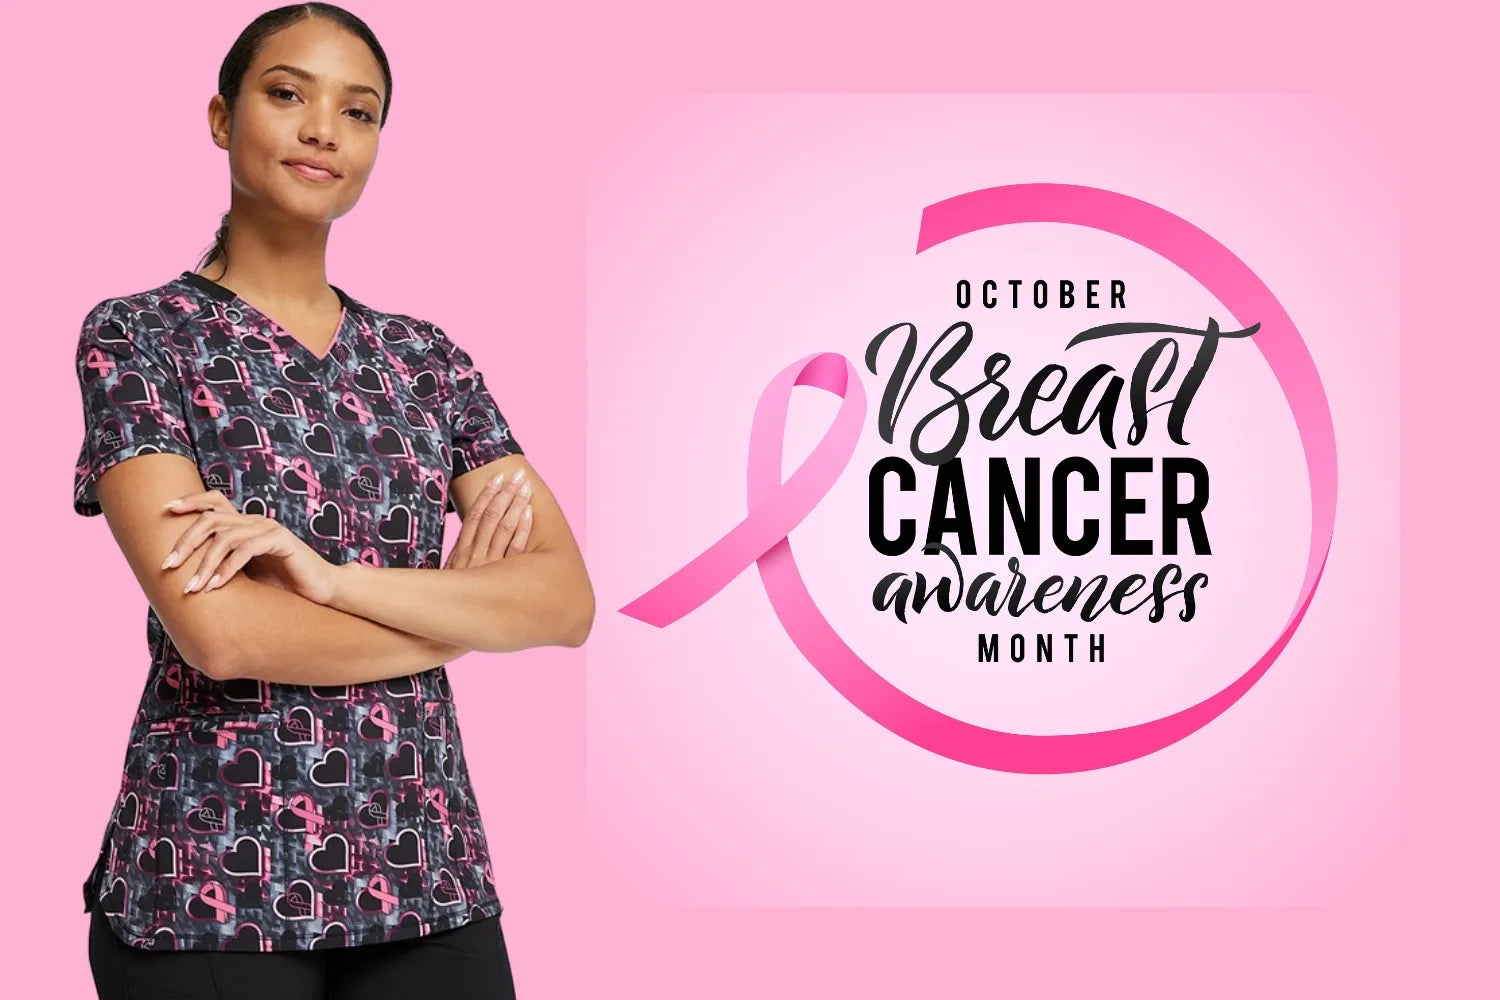 Breast Cancer Awareness Think Pink scrubs collection at Scrub Pro Uniforms.